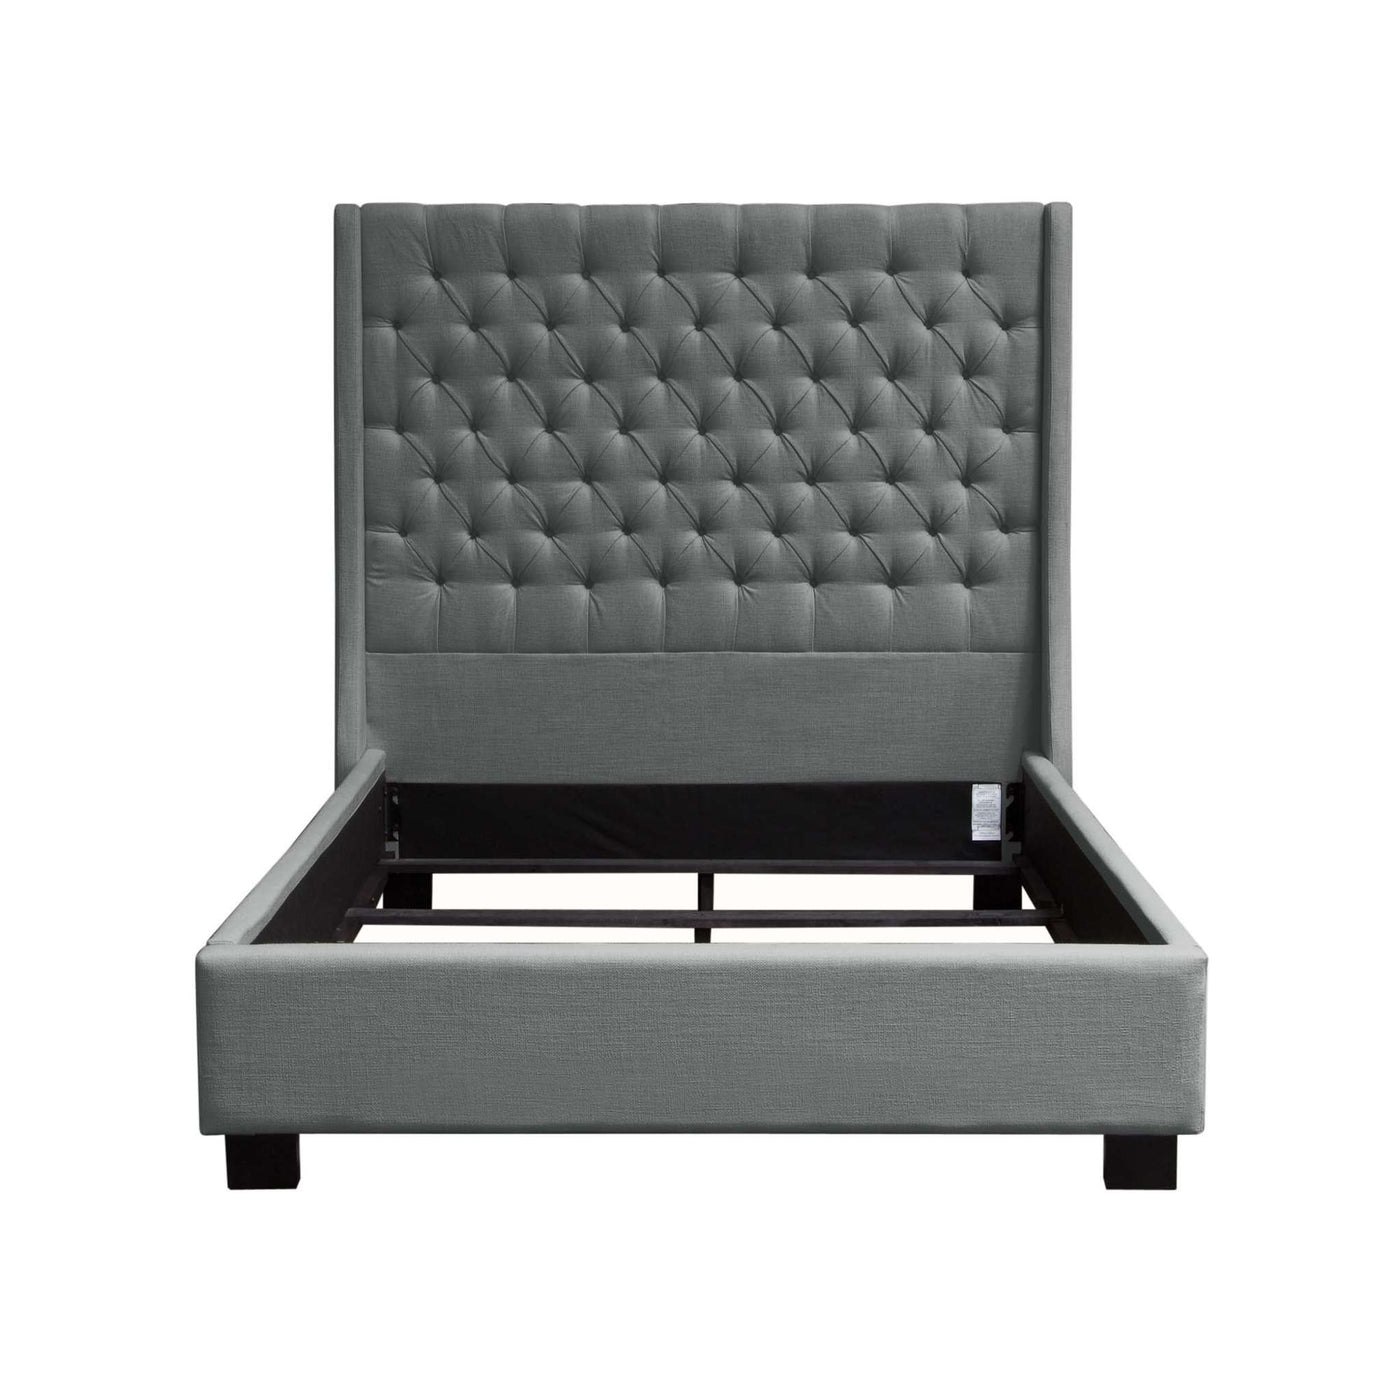 The Park Ave Bed by Diamond Sofa